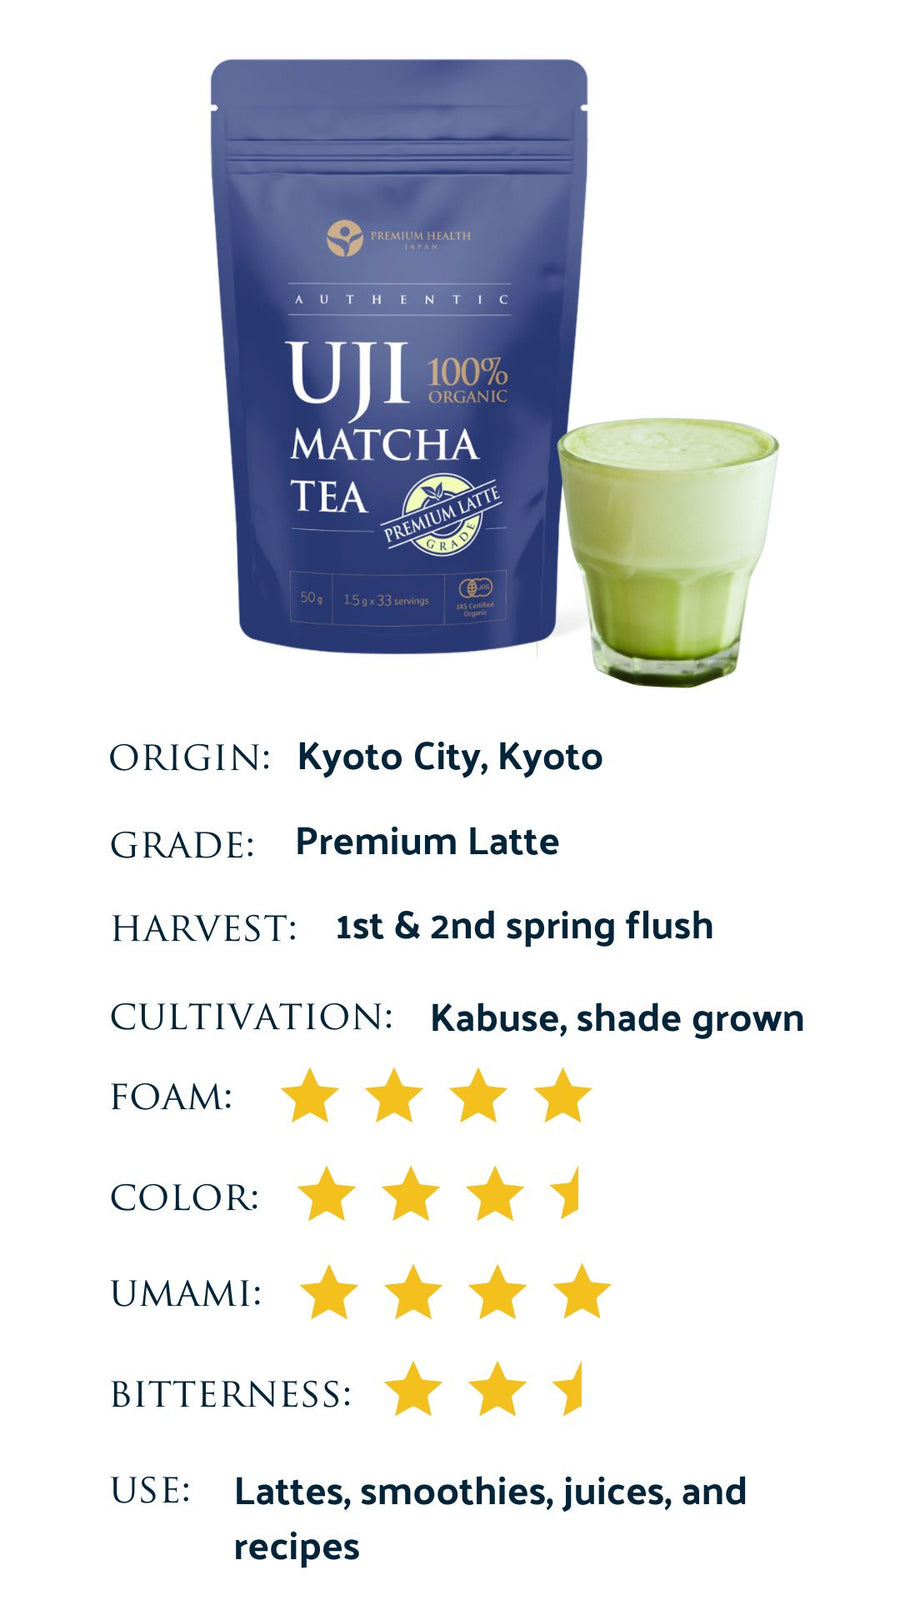 Product profile for our premium latte grade Uji matcha which rates the product according to various categories